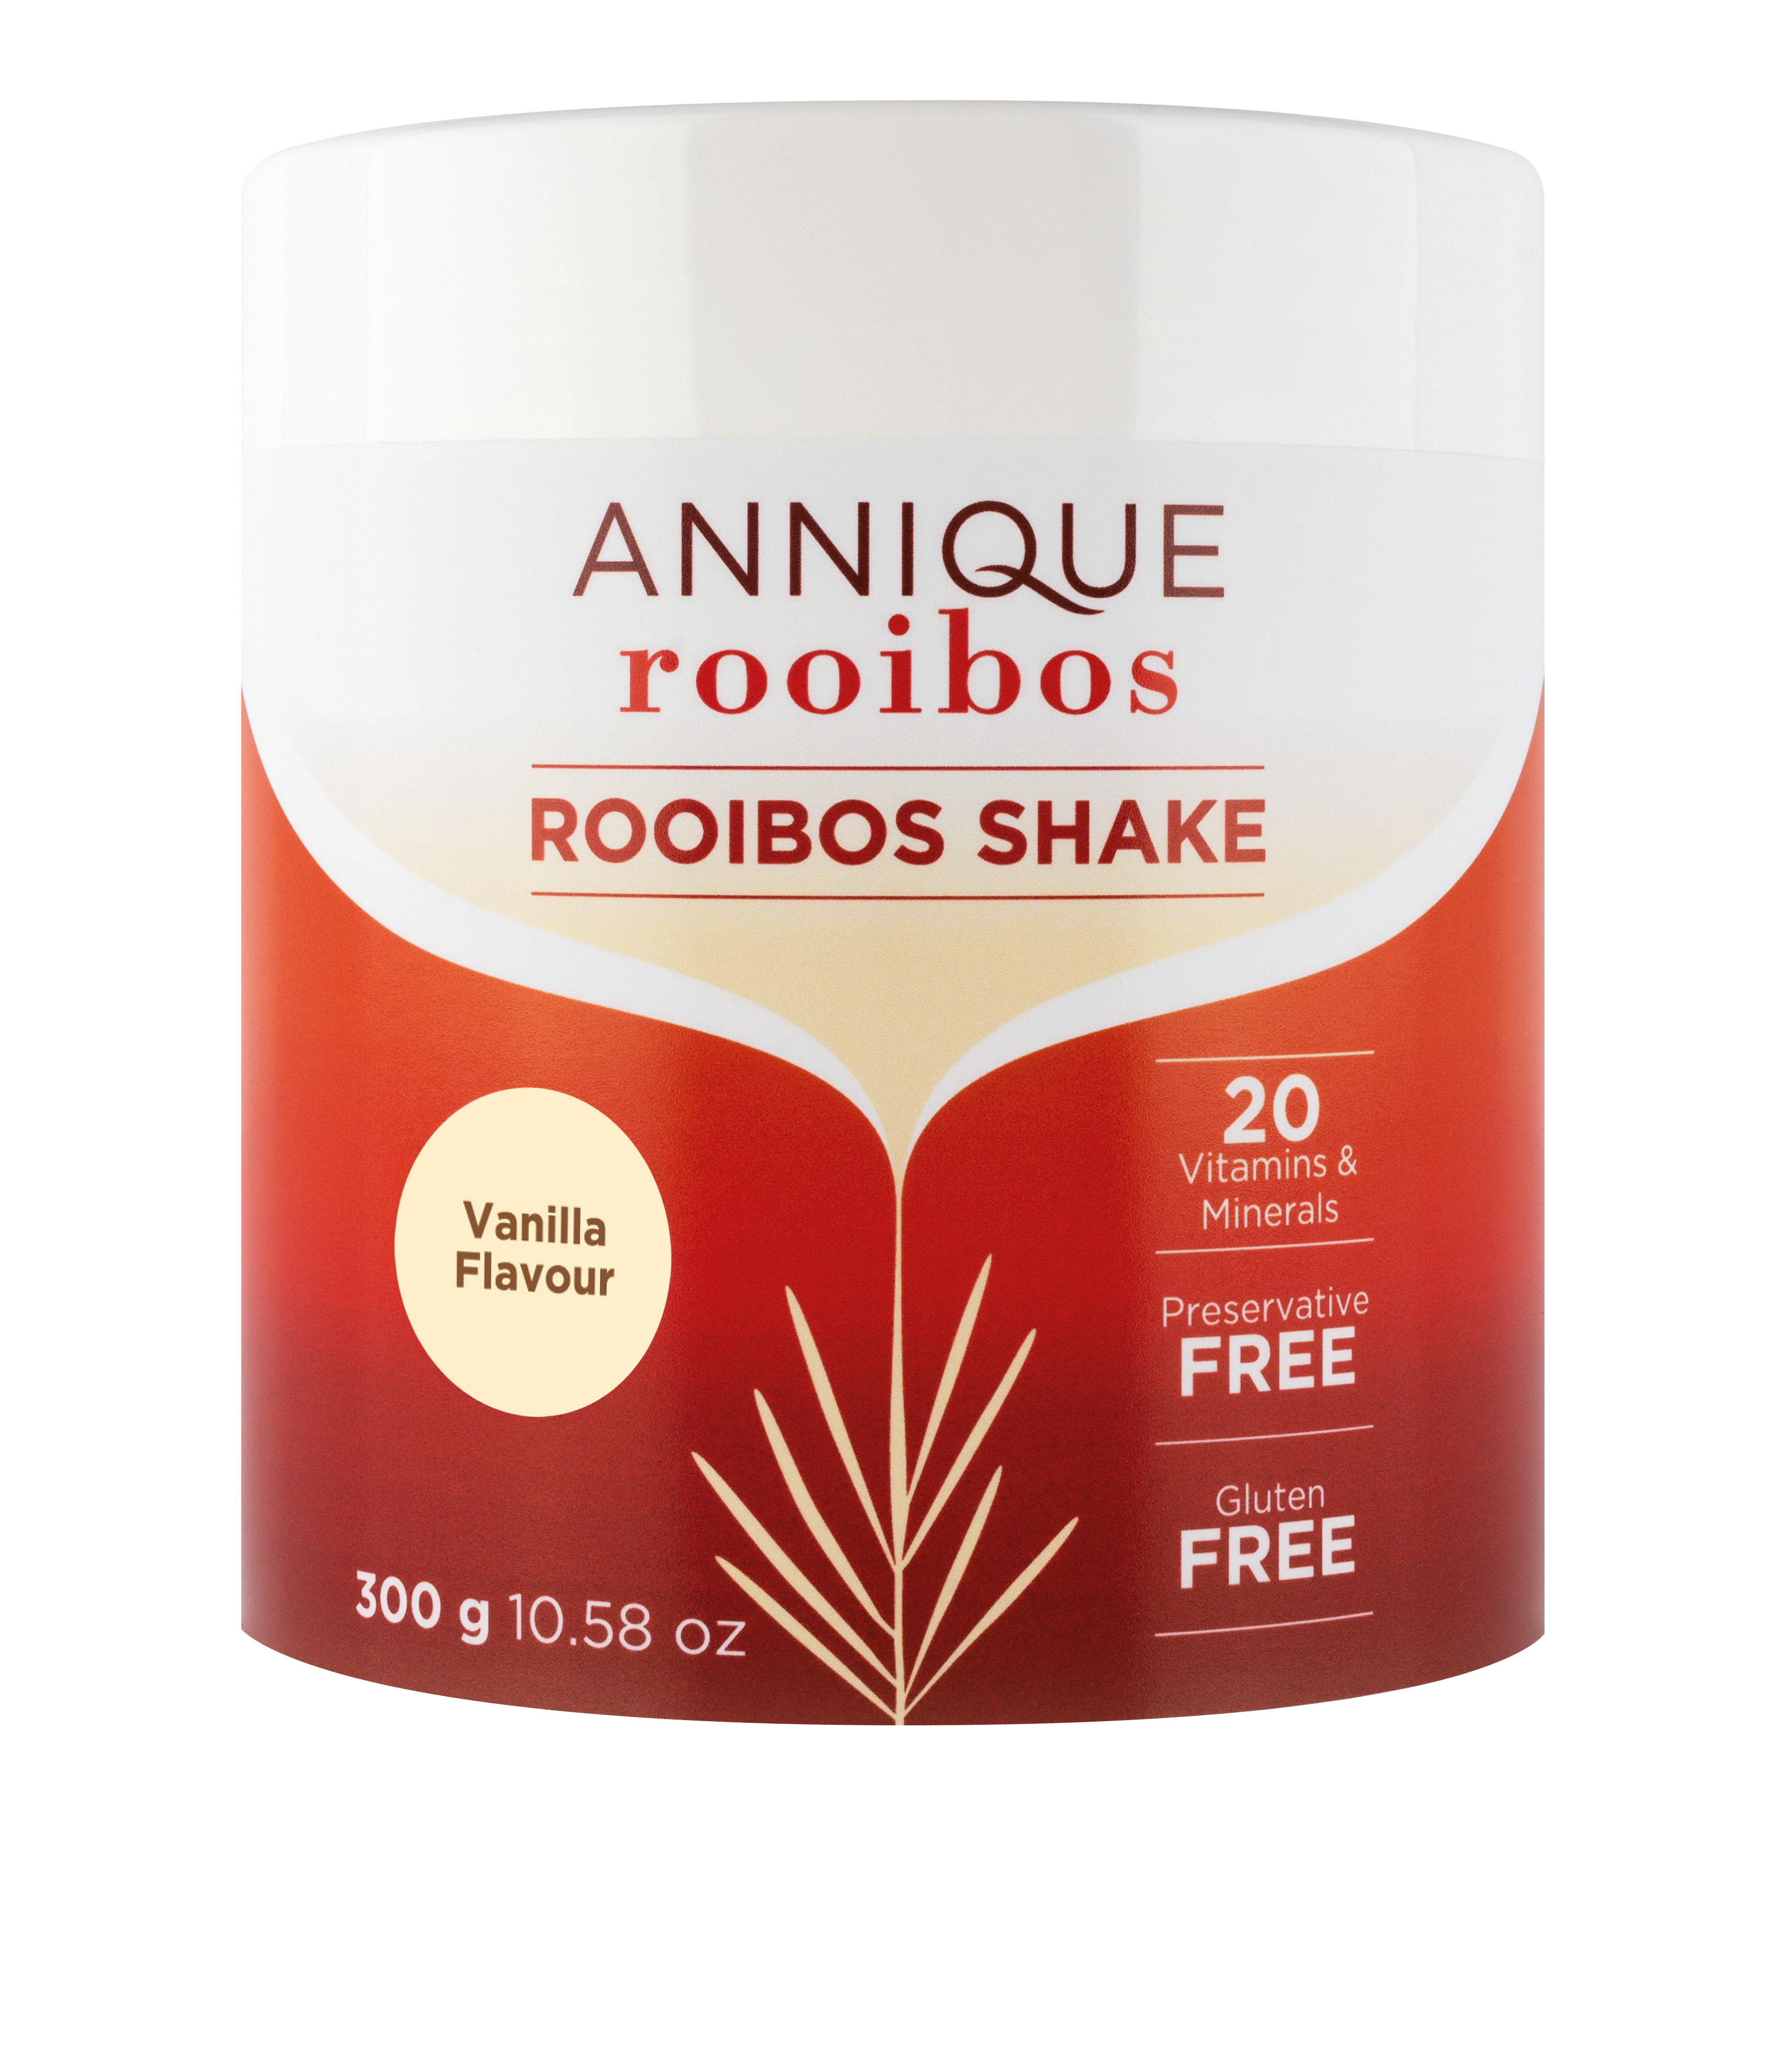 Annique Rooibos Lifestyle Shake – 500g